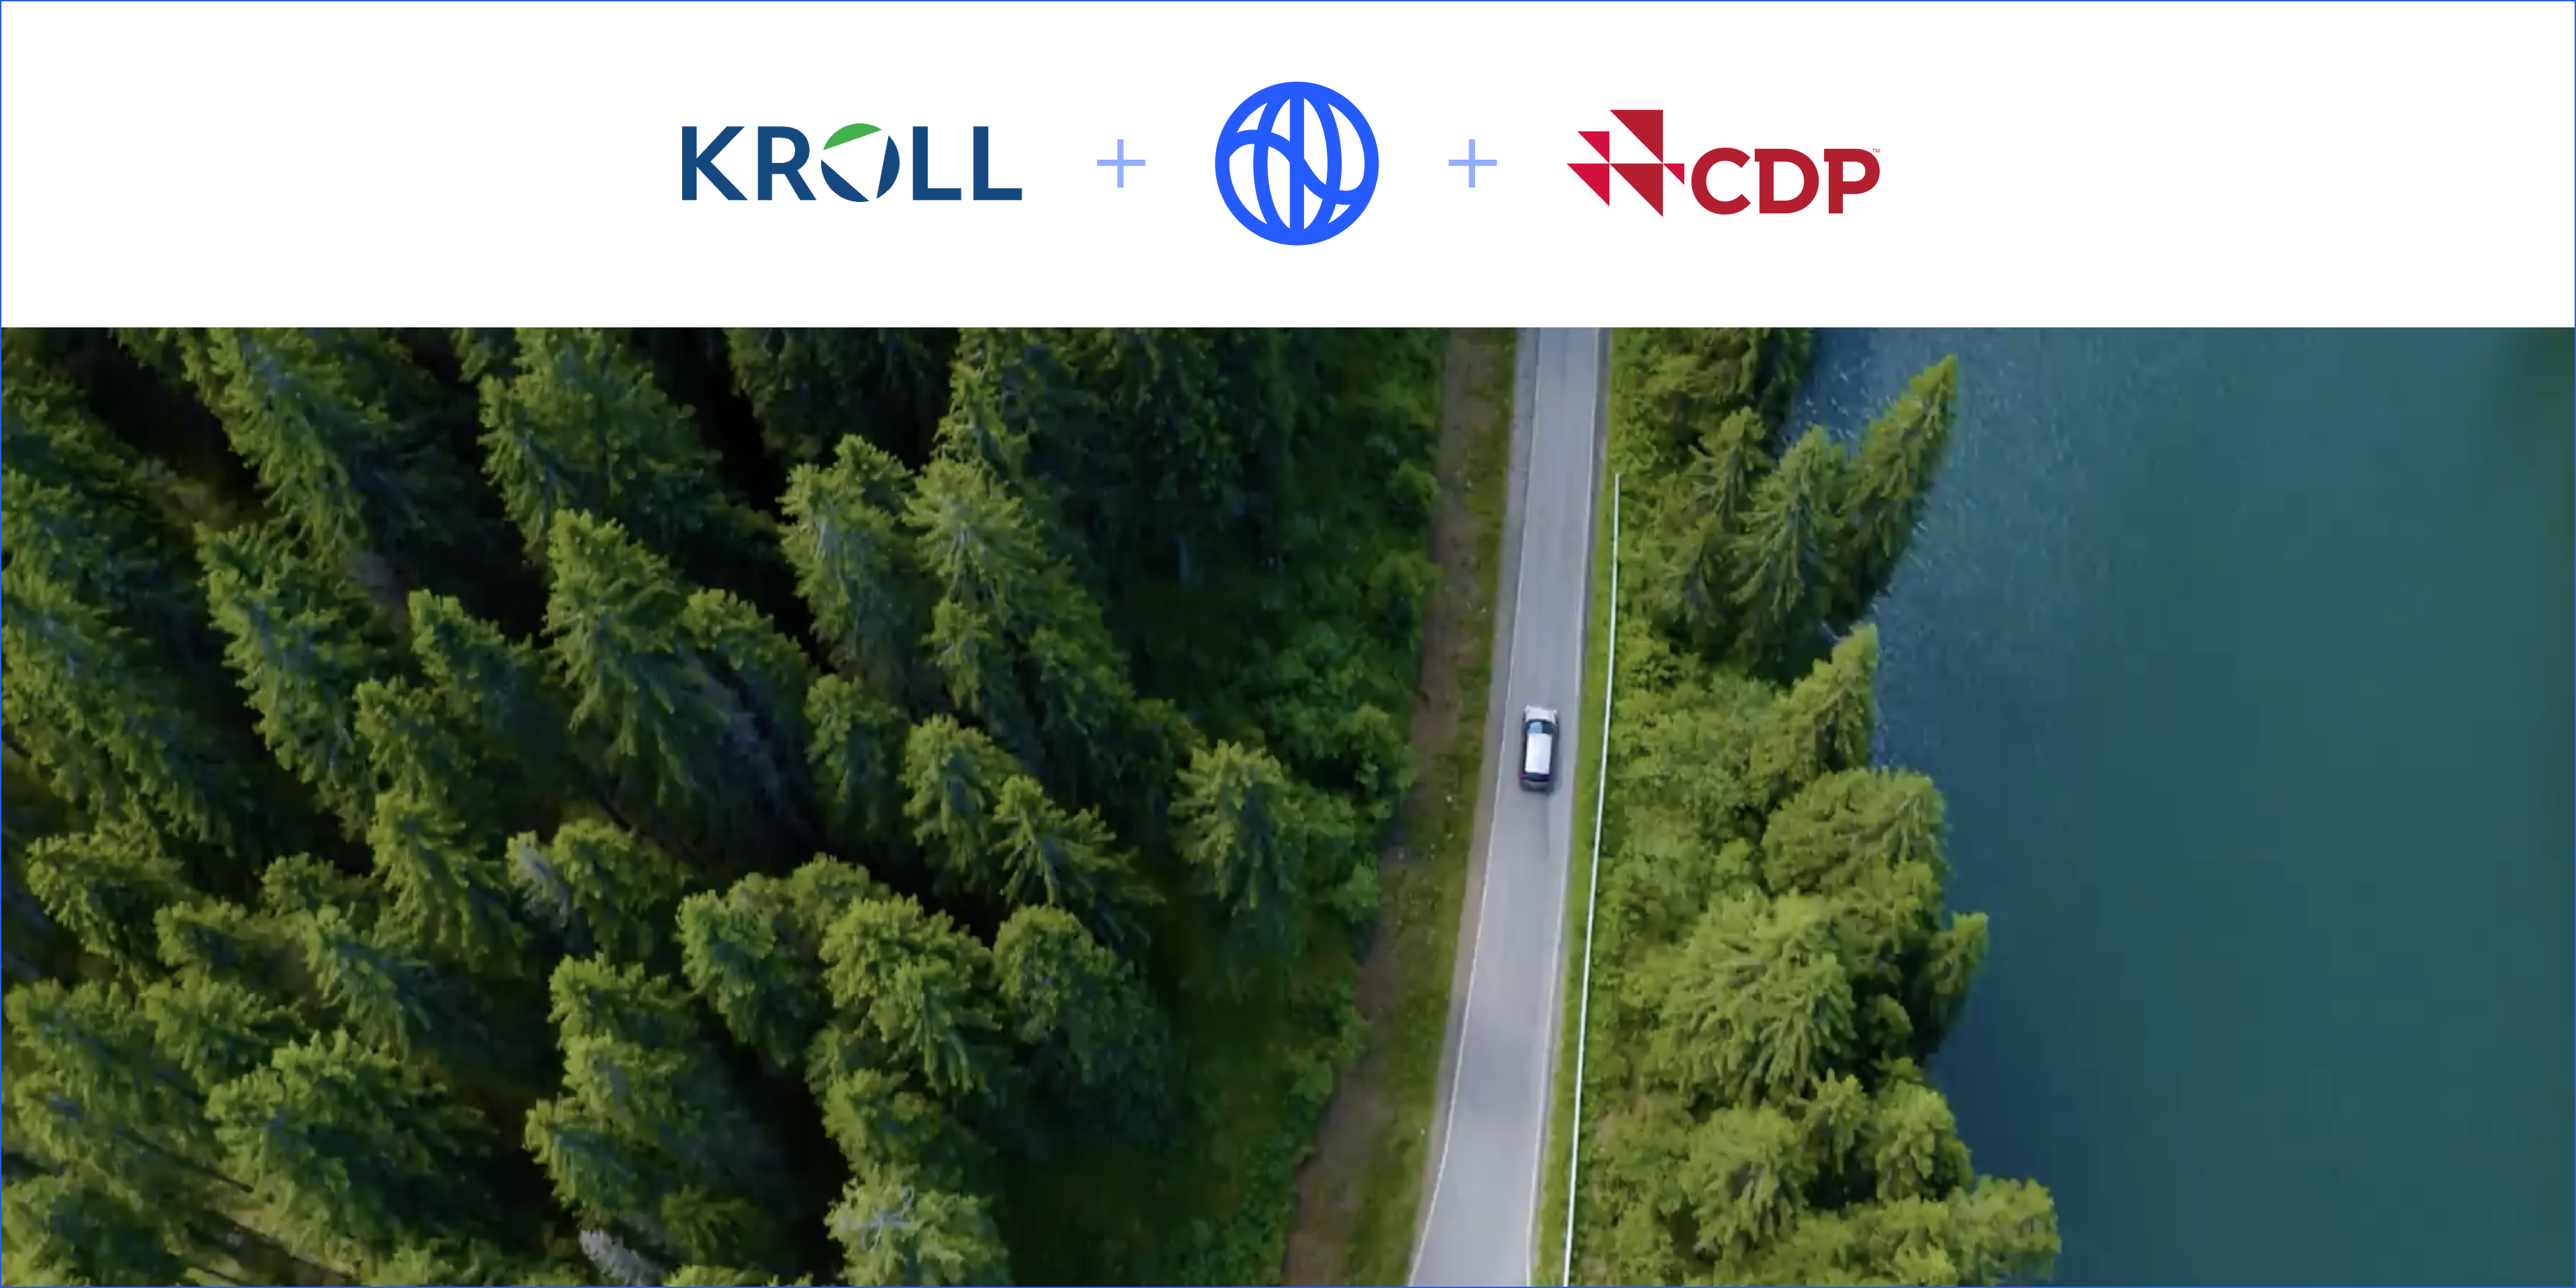 kroll and watershed and cdp logos